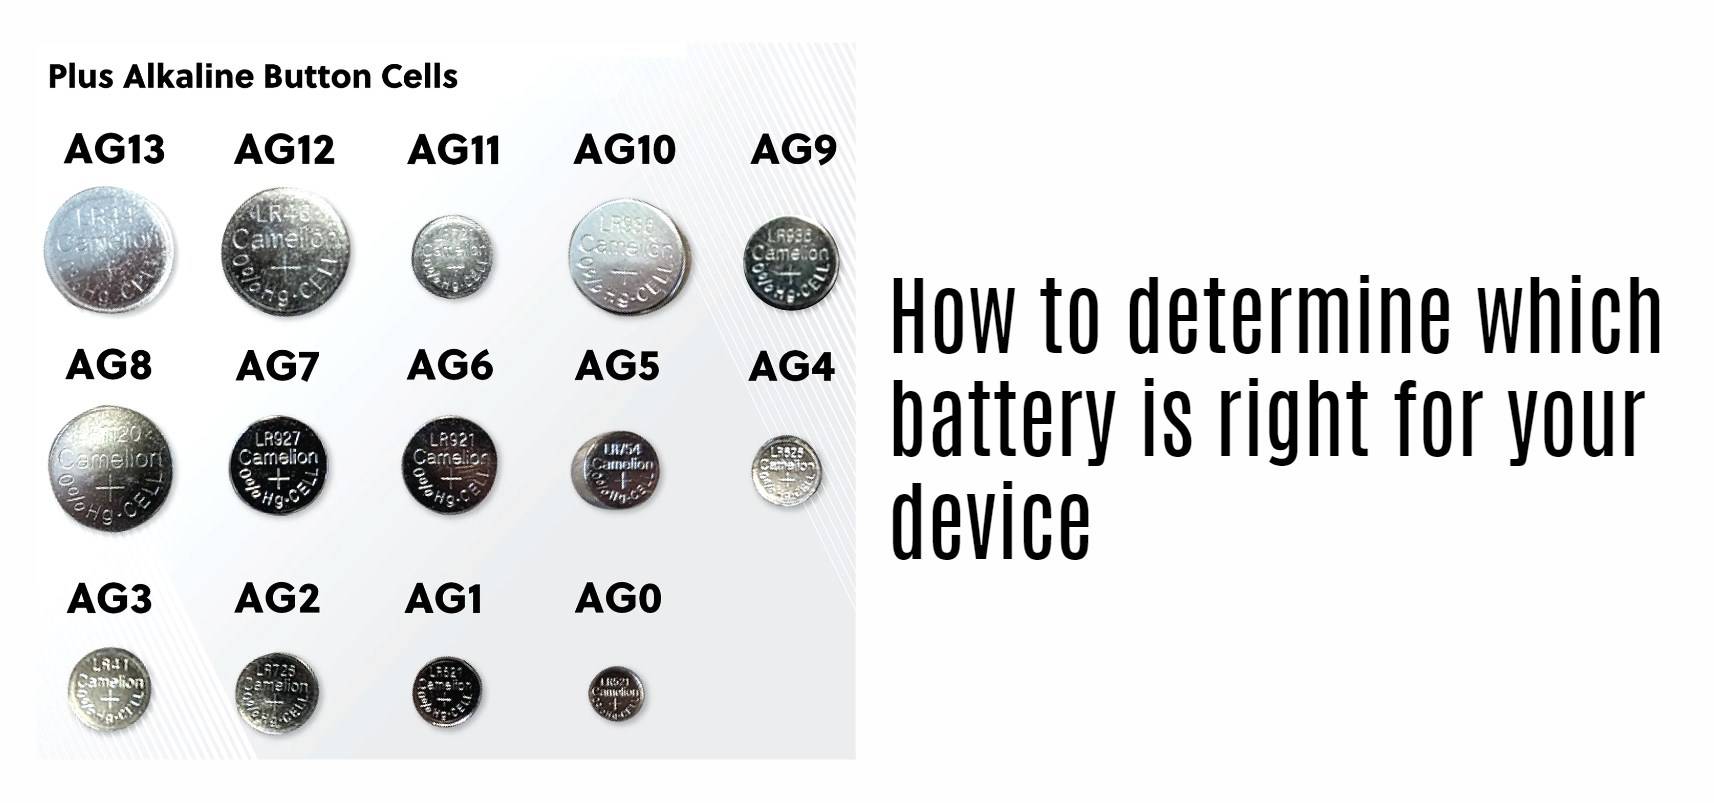 How to determine which battery is right for your device. ag1, ag2, ag3, ag4, ag5, ag13, ag0